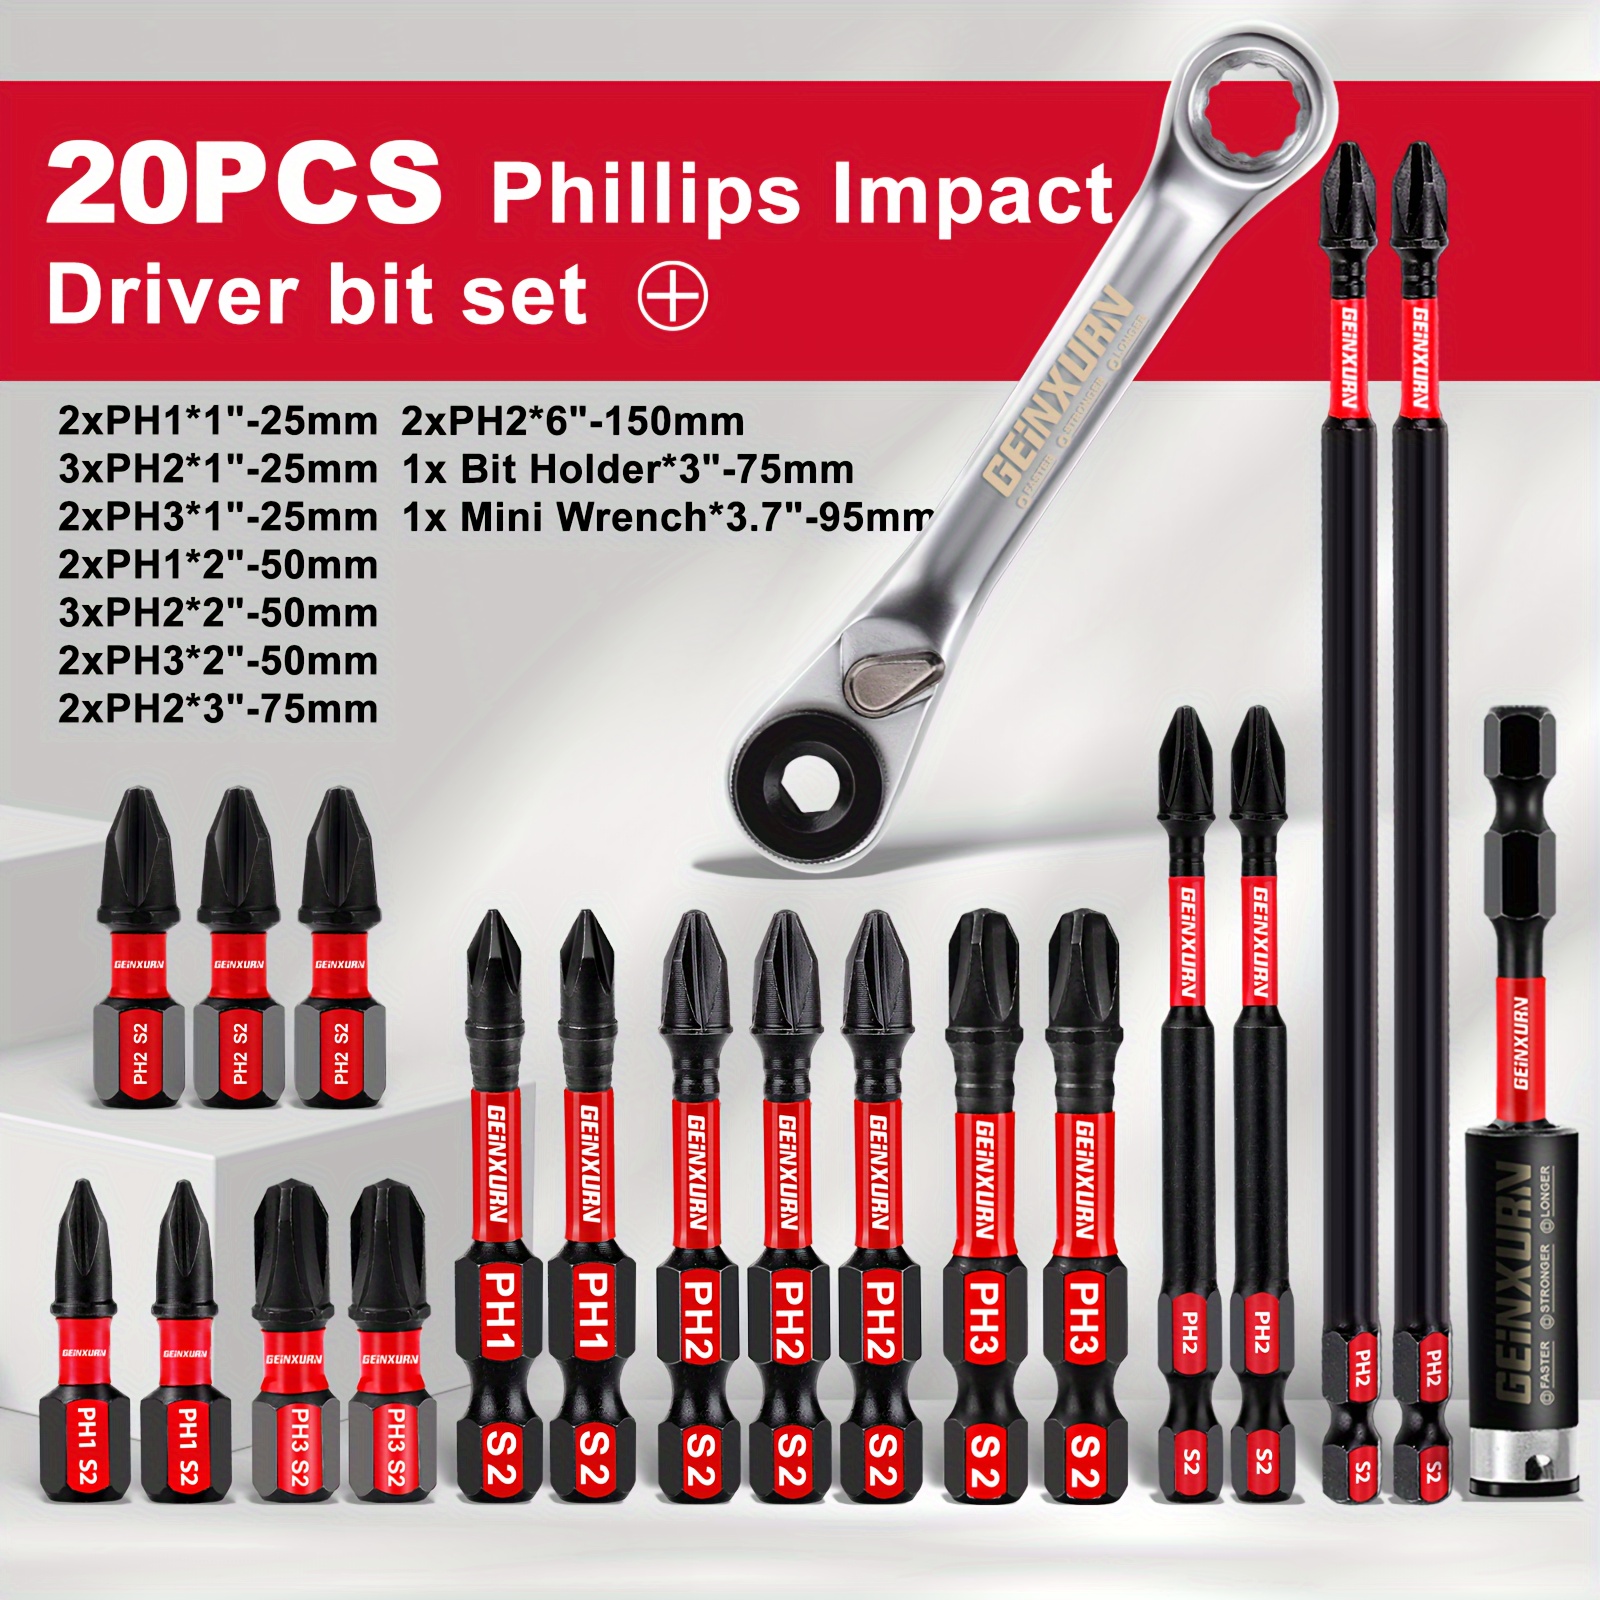 

20-piece Set Of Phillips Screws (2xph1*25mm, 3xph2*25mm, 2xph3*25mm, 2xph1*50mm, 3xph2*50mm, 2xph3*50mm, 2xph2*75mm, 2xph2*150mm, ), Including Connecting Rods And Small Wrenches